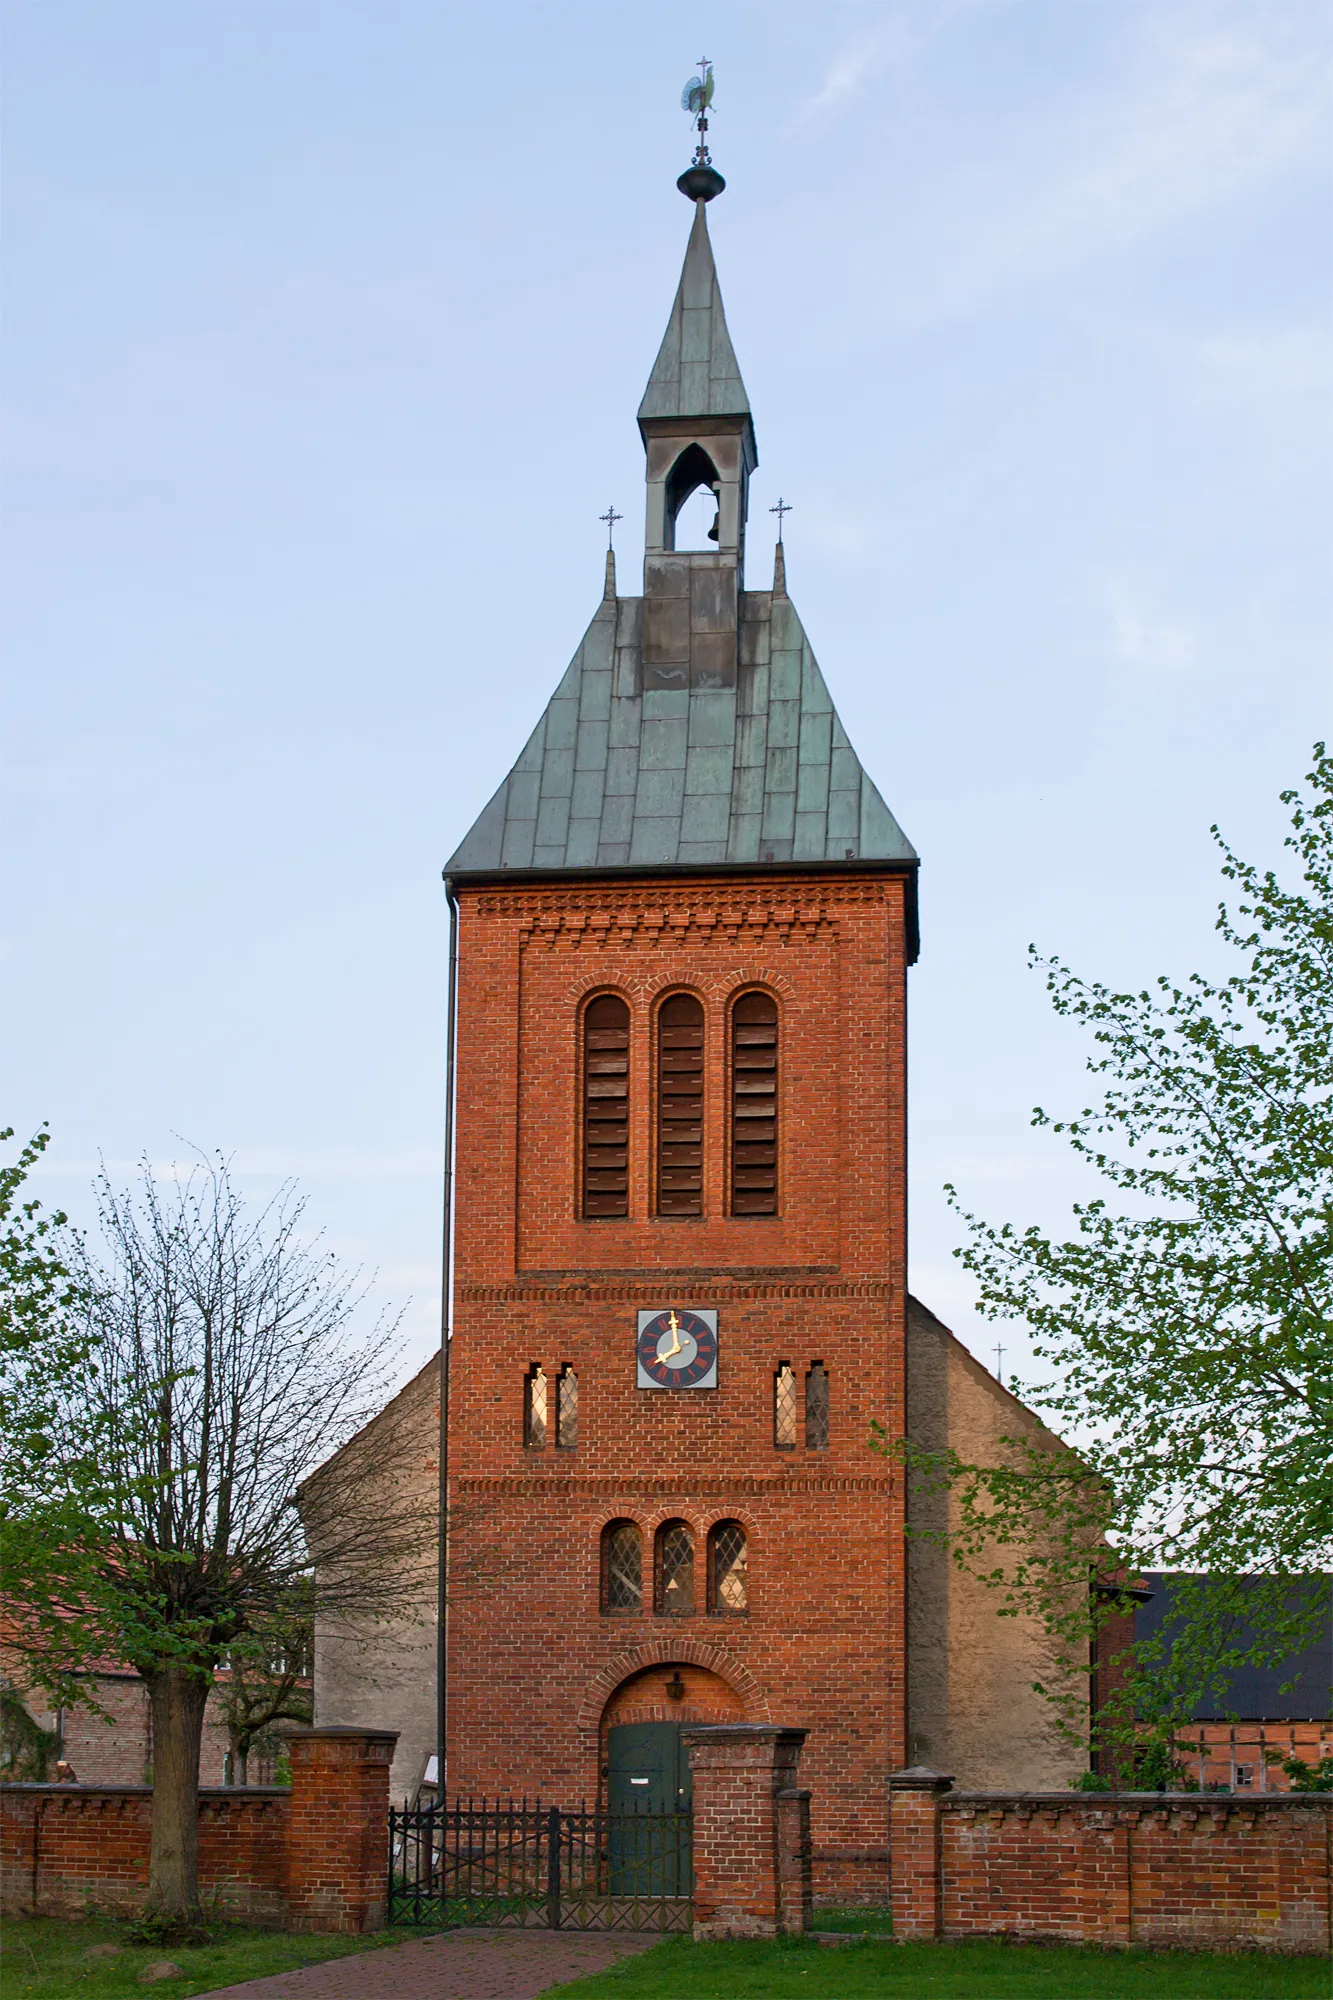 Photo showing: Church of the village Prezelle, district Lüchow-Dannenberg, Lower Saxony, Germany.